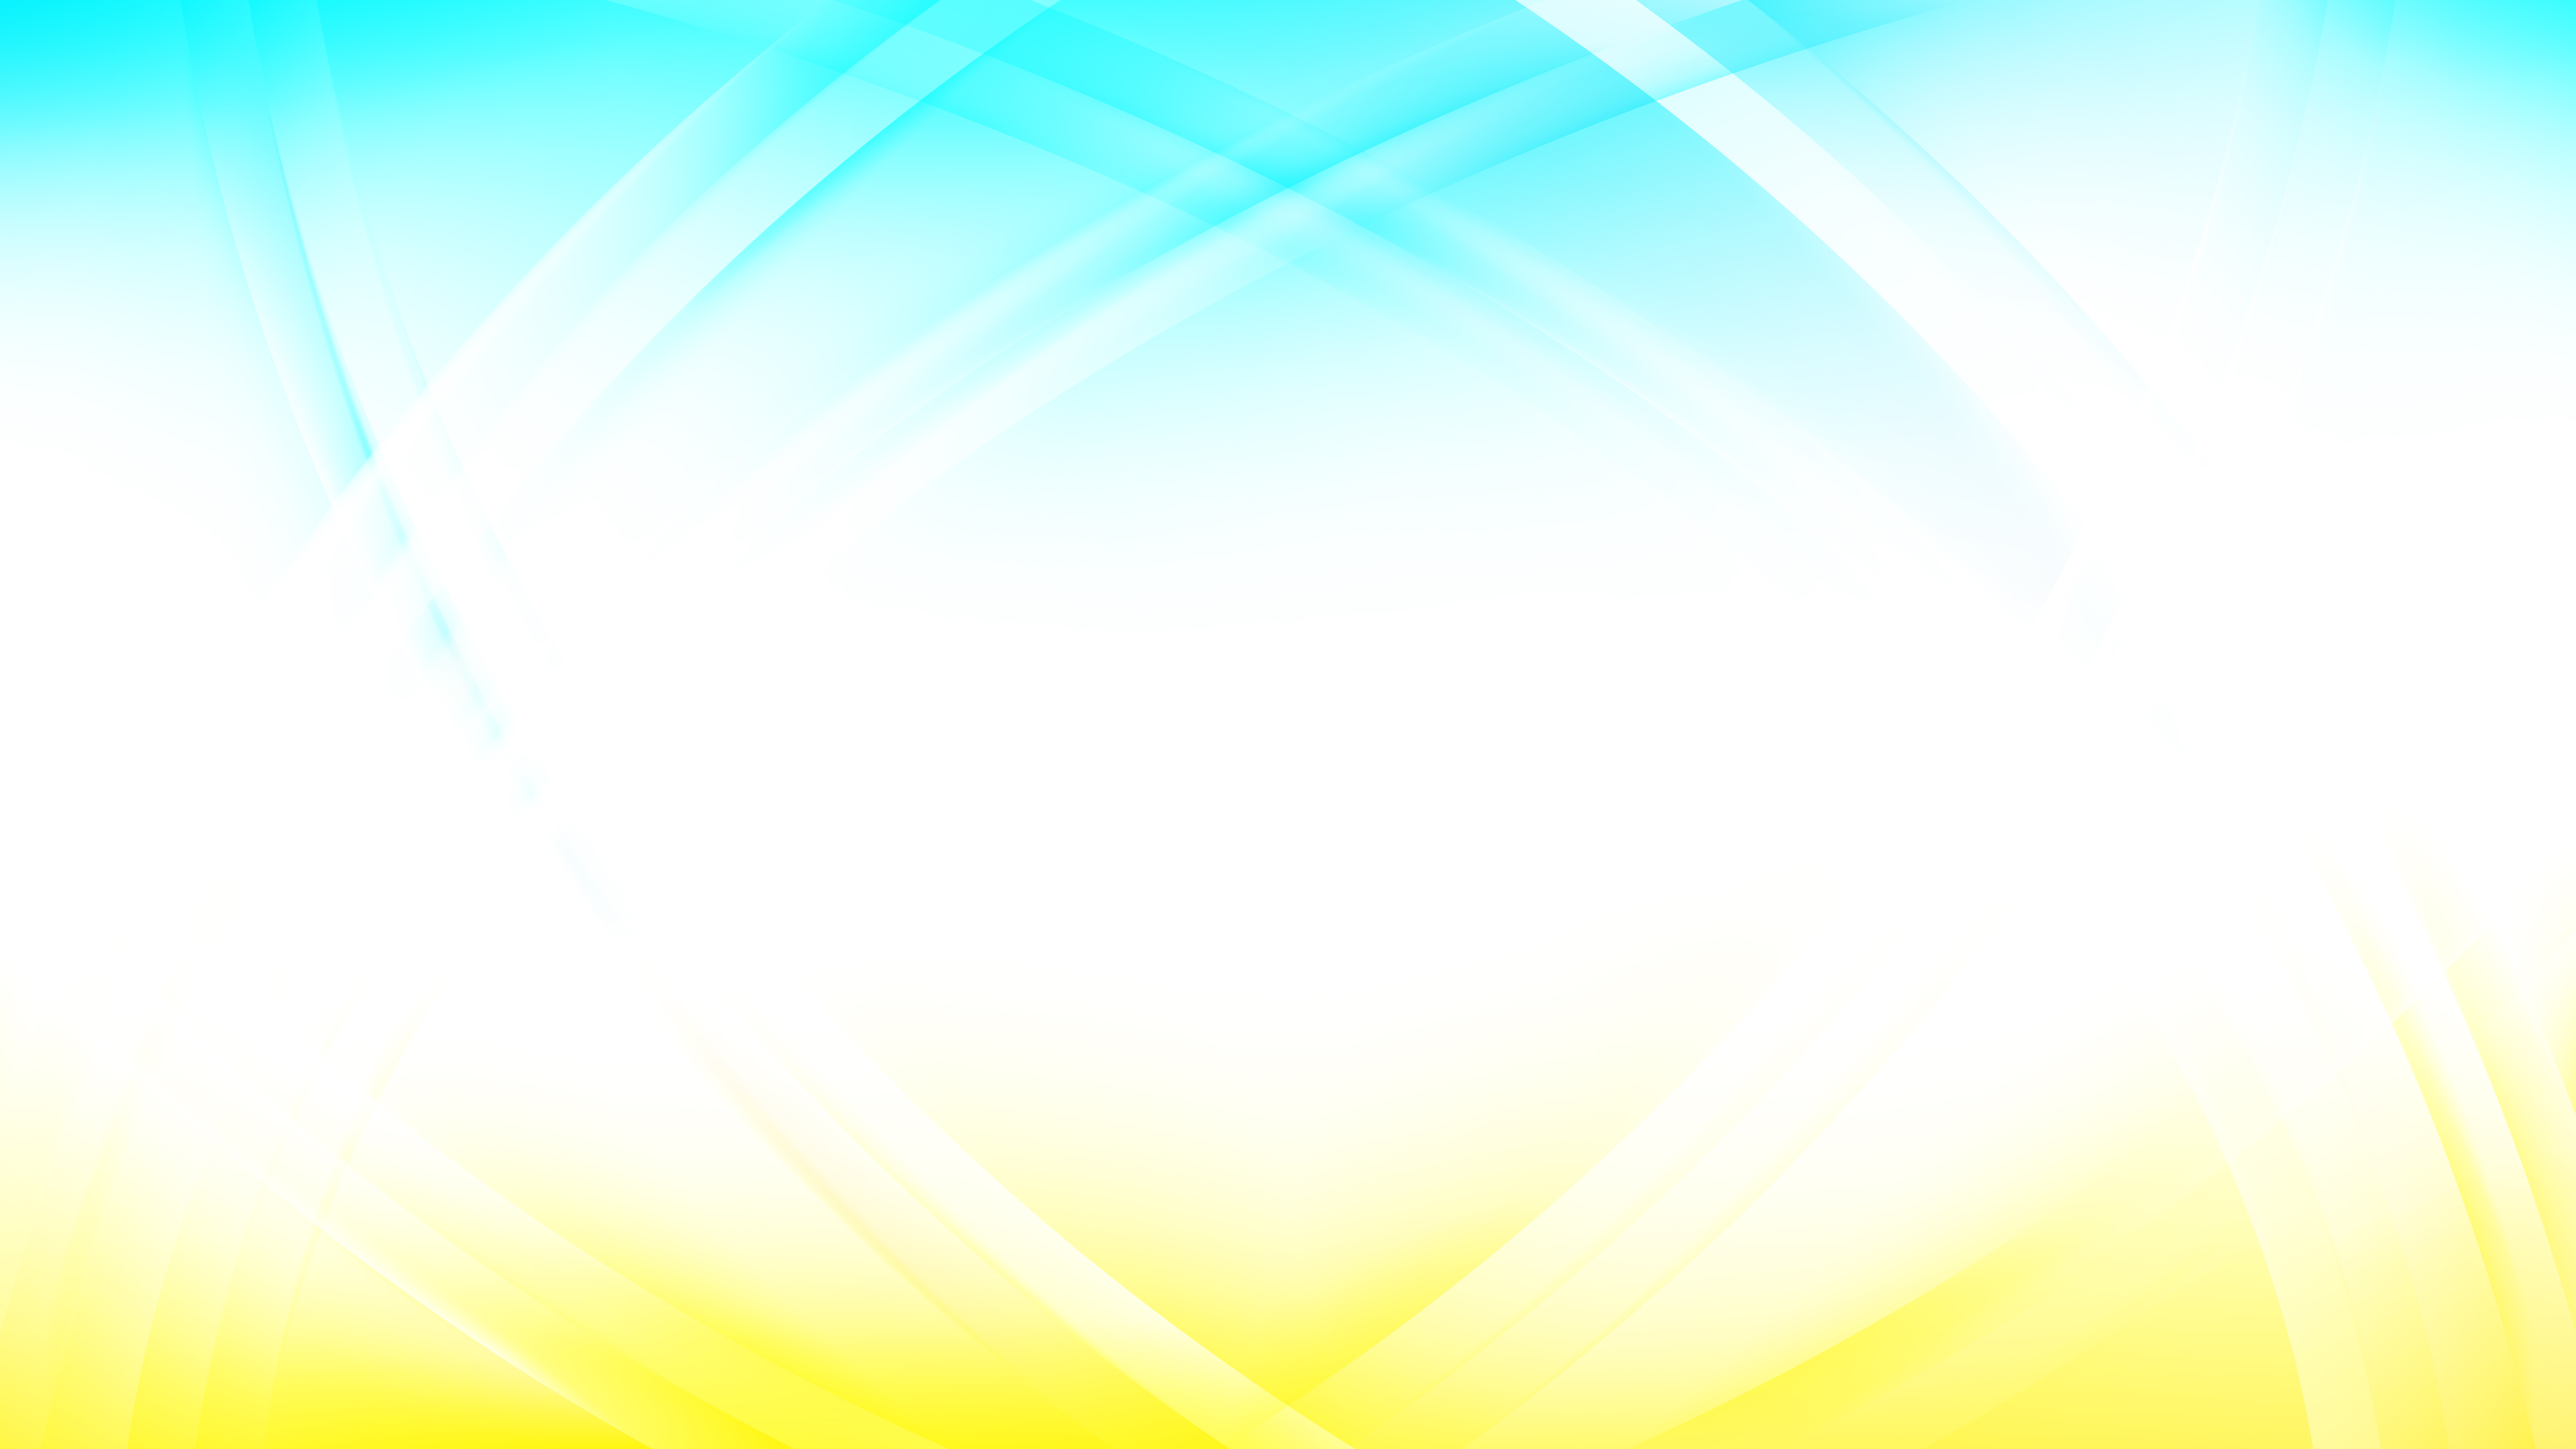 Free Blue And Yellow Waves Curved Lines Background Vector Illustration